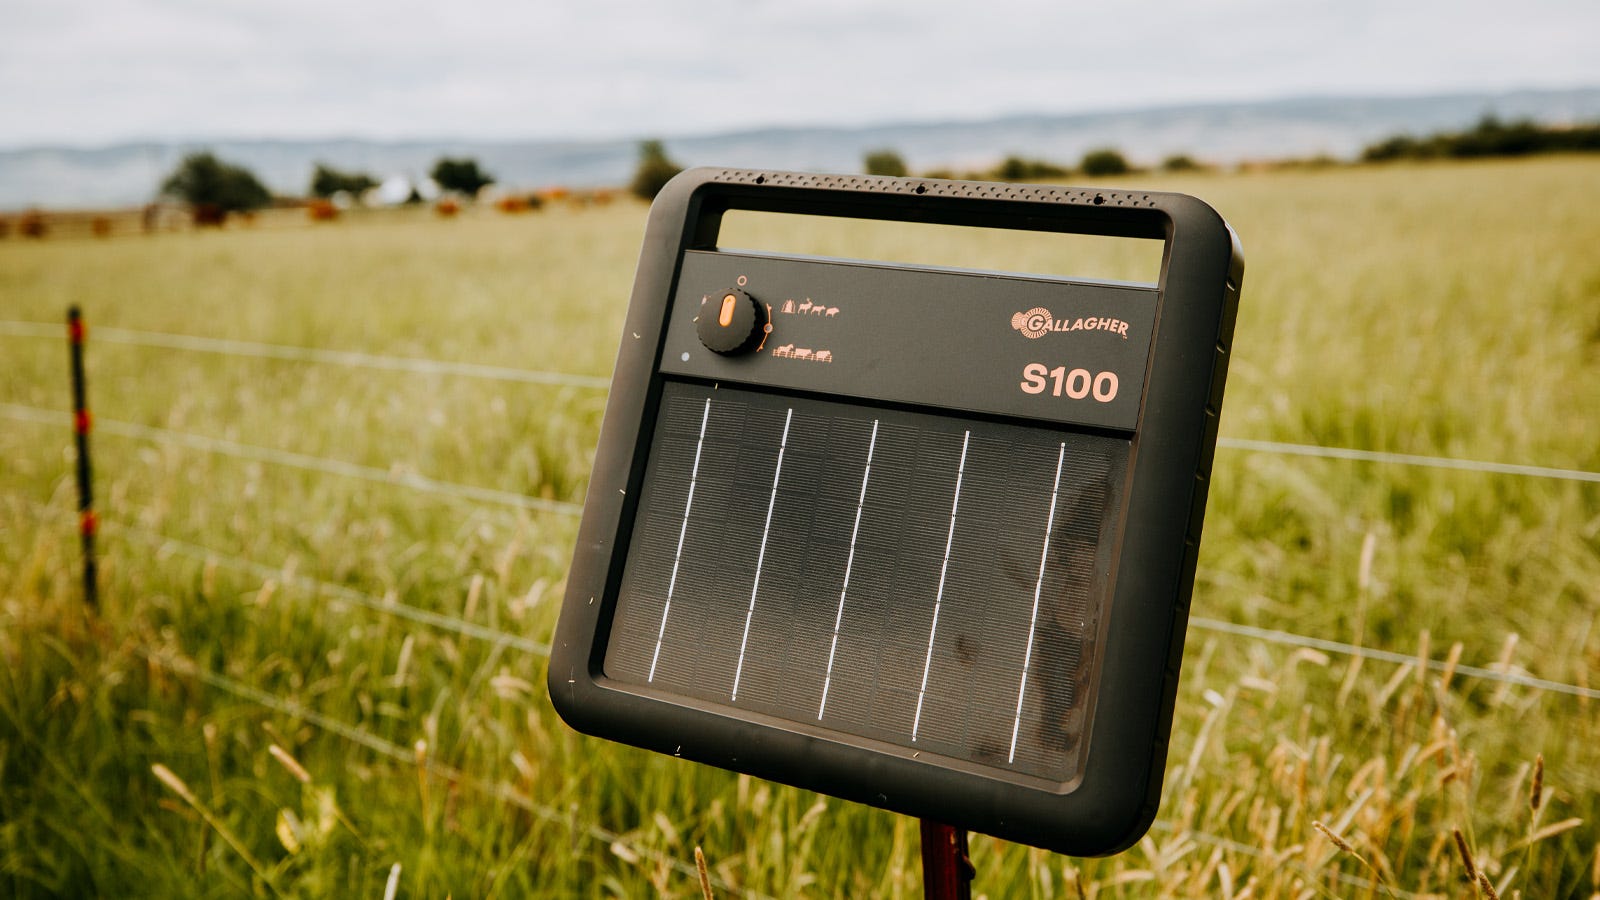 A Gallagher s100 energizer on a post in a field full of grass